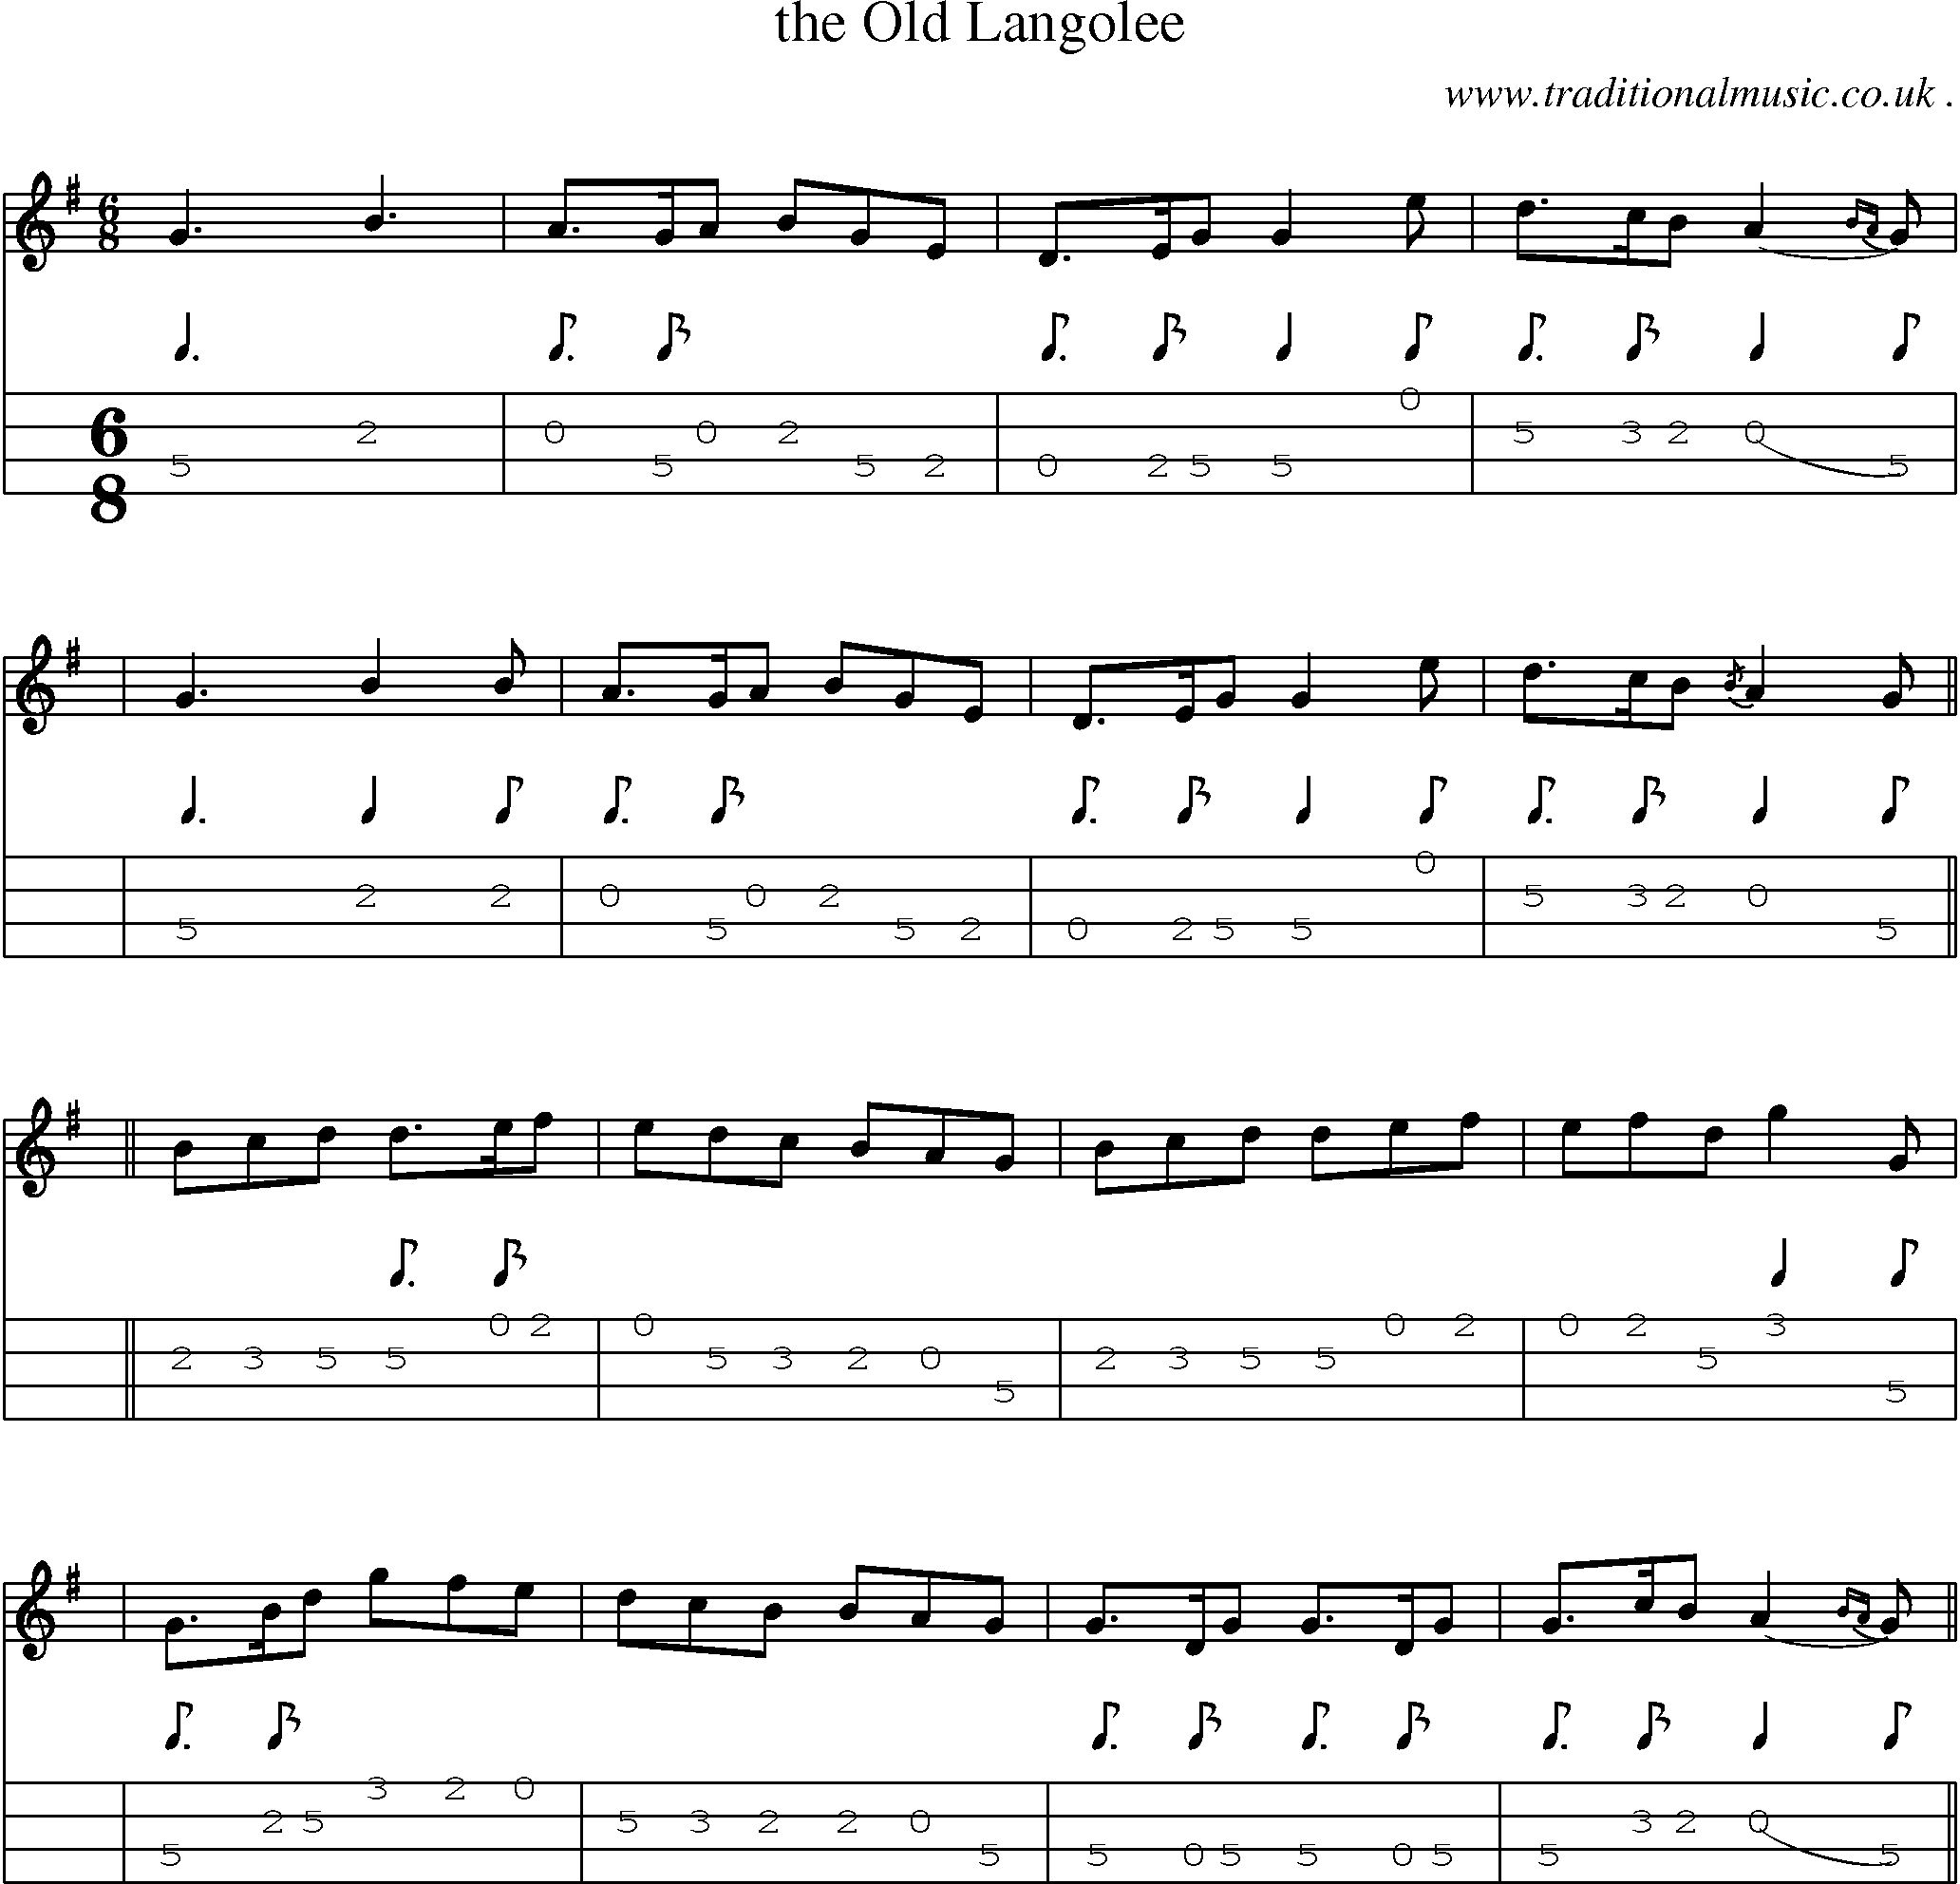 Sheet-music  score, Chords and Mandolin Tabs for The Old Langolee